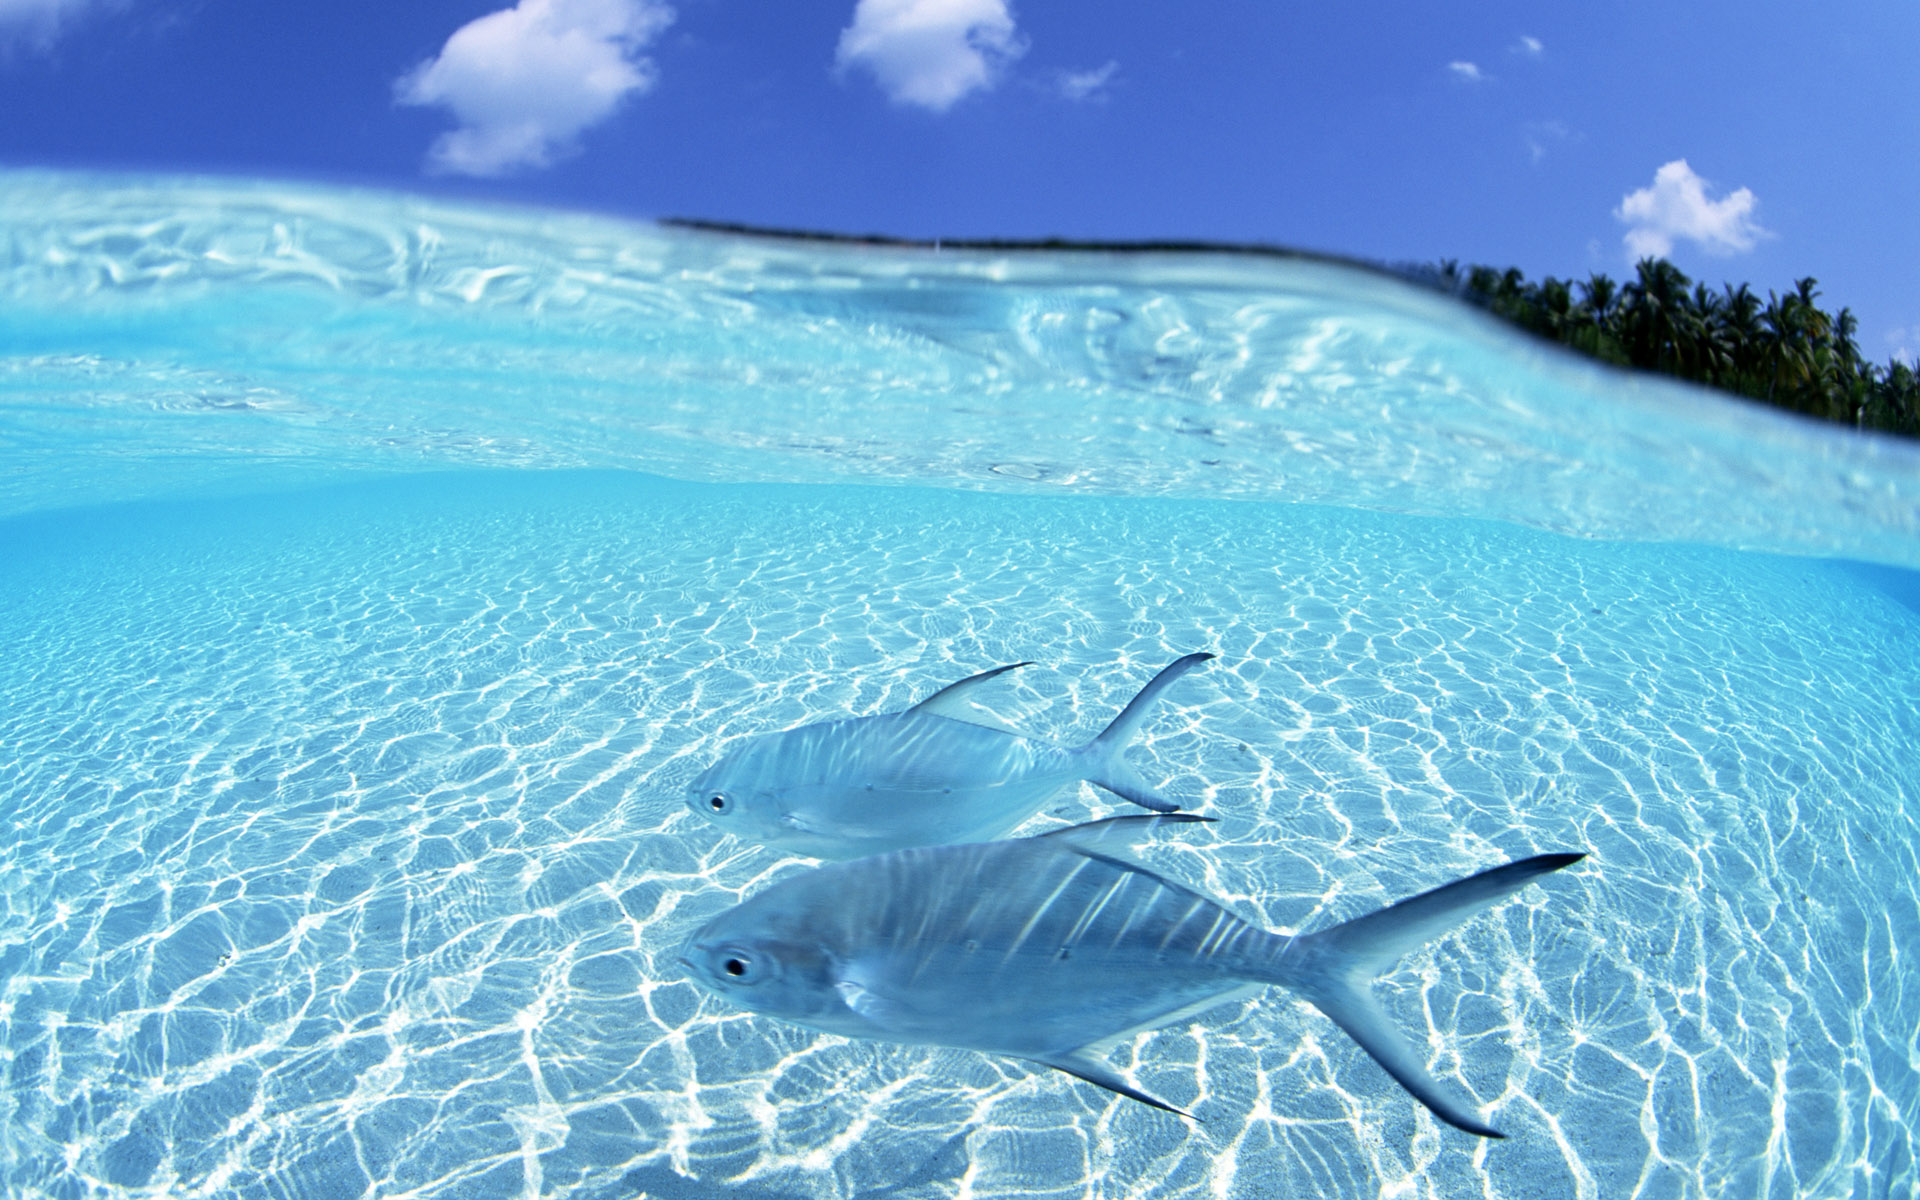 The Wallpaper Clear Sea Water Two Fishes In Light Blue Swimming